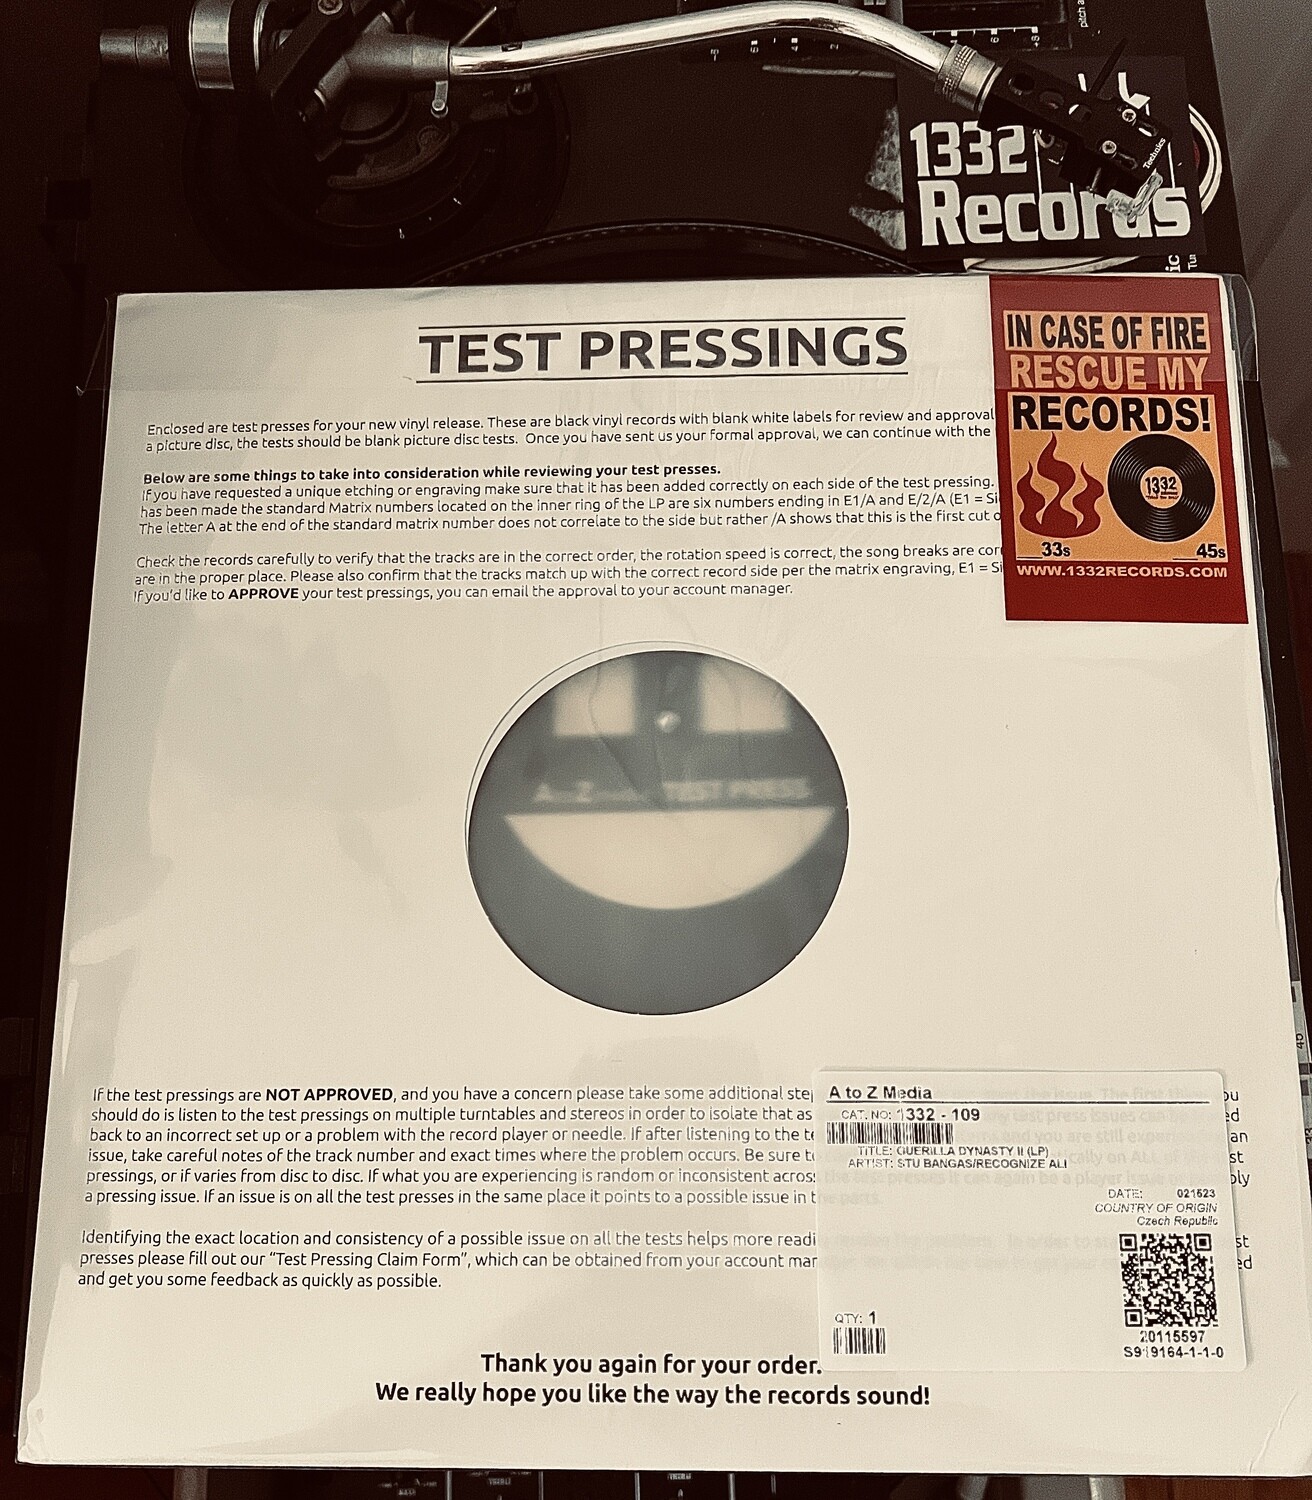 Stu Bangas x Recognize Ali "Guerilla Dynasty 2" LIMITED EDITION Test Presses - Signed by Stu Bangas (ONLY 4 IN TOTAL)